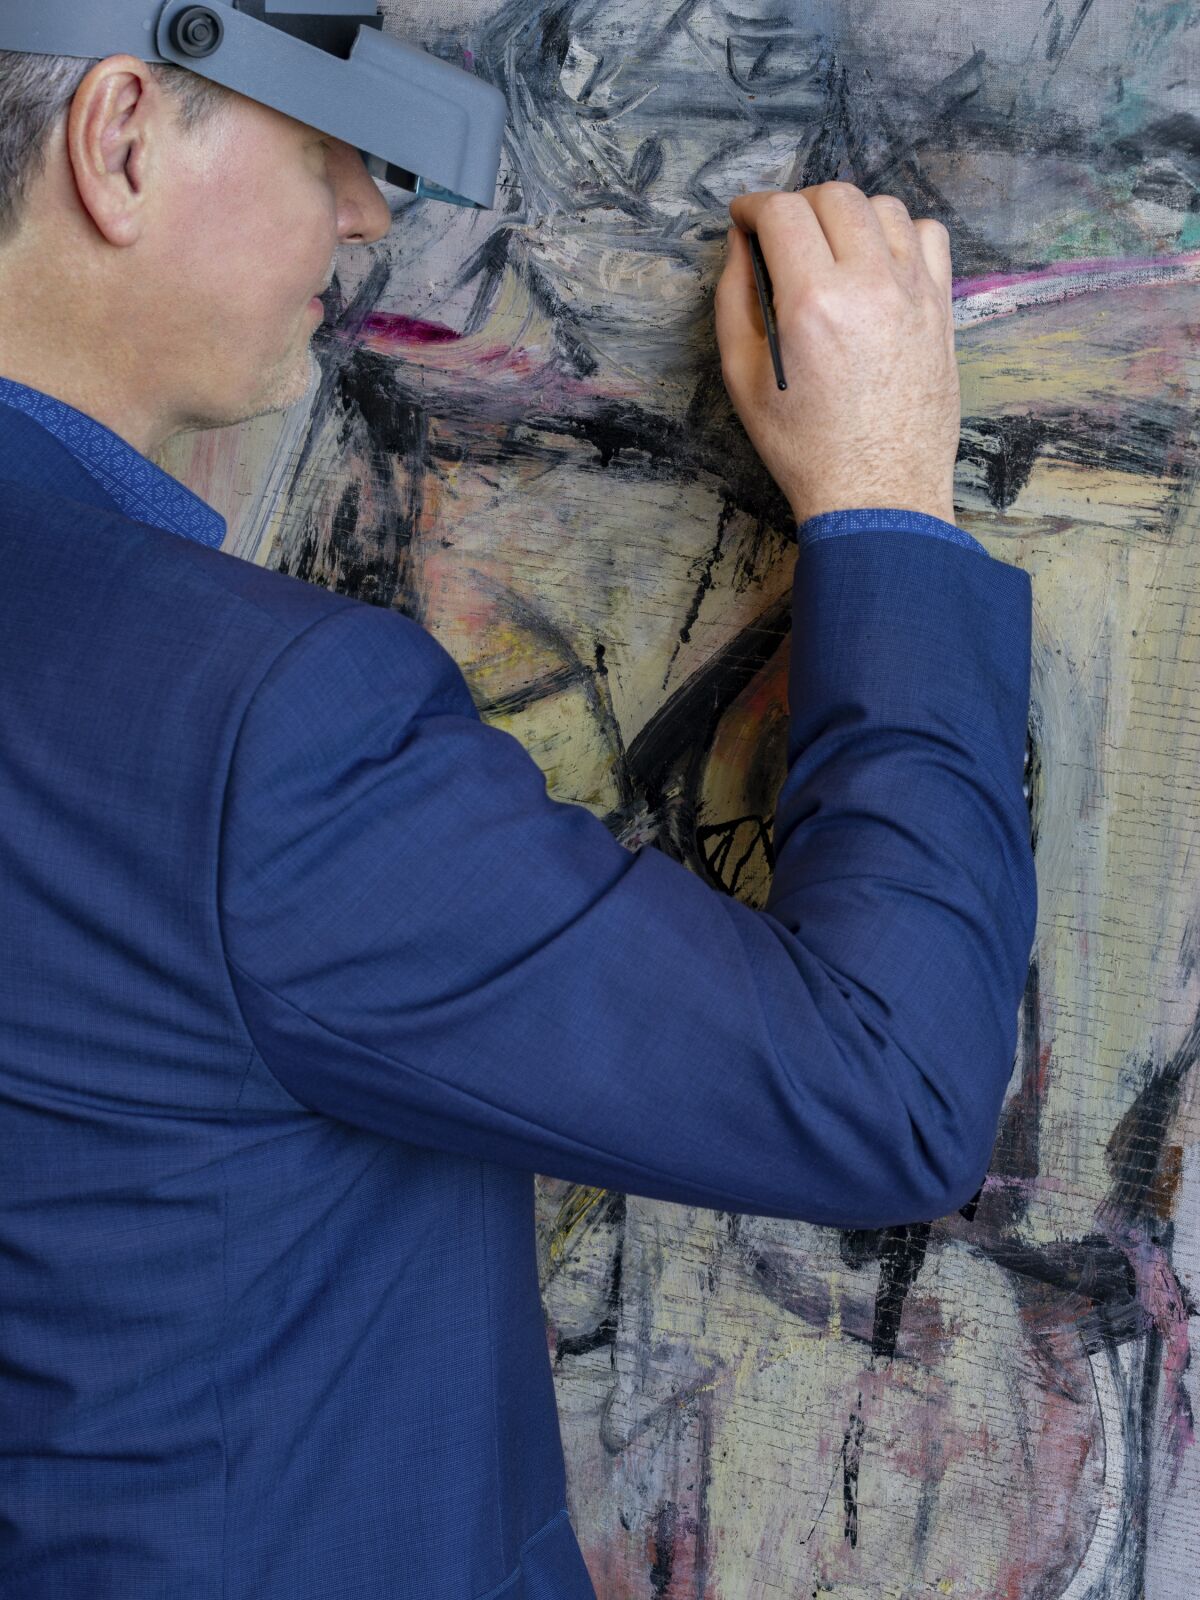 A man fills in paint losses in a painting.